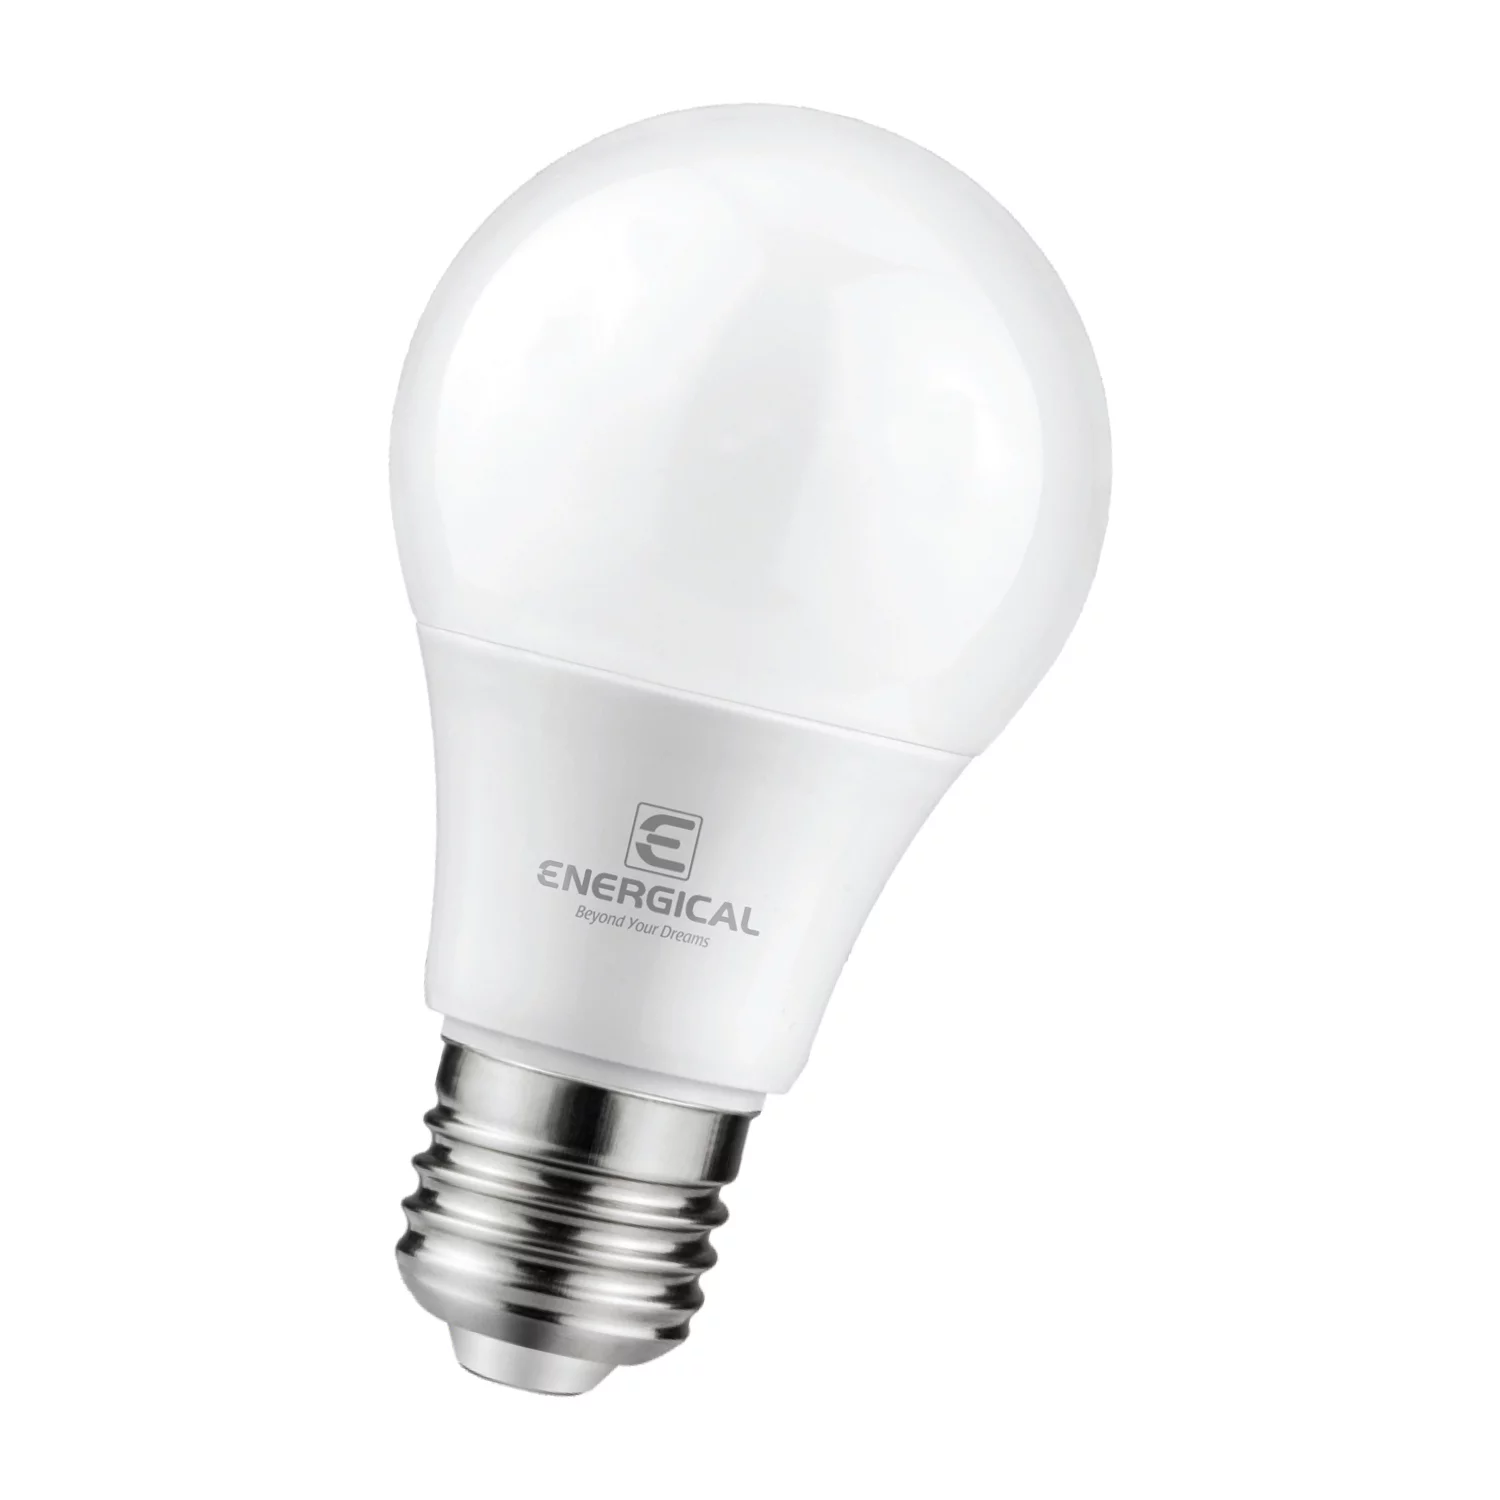 https://energical.com/wp-content/uploads/2022/06/lampe-dimmable.webp